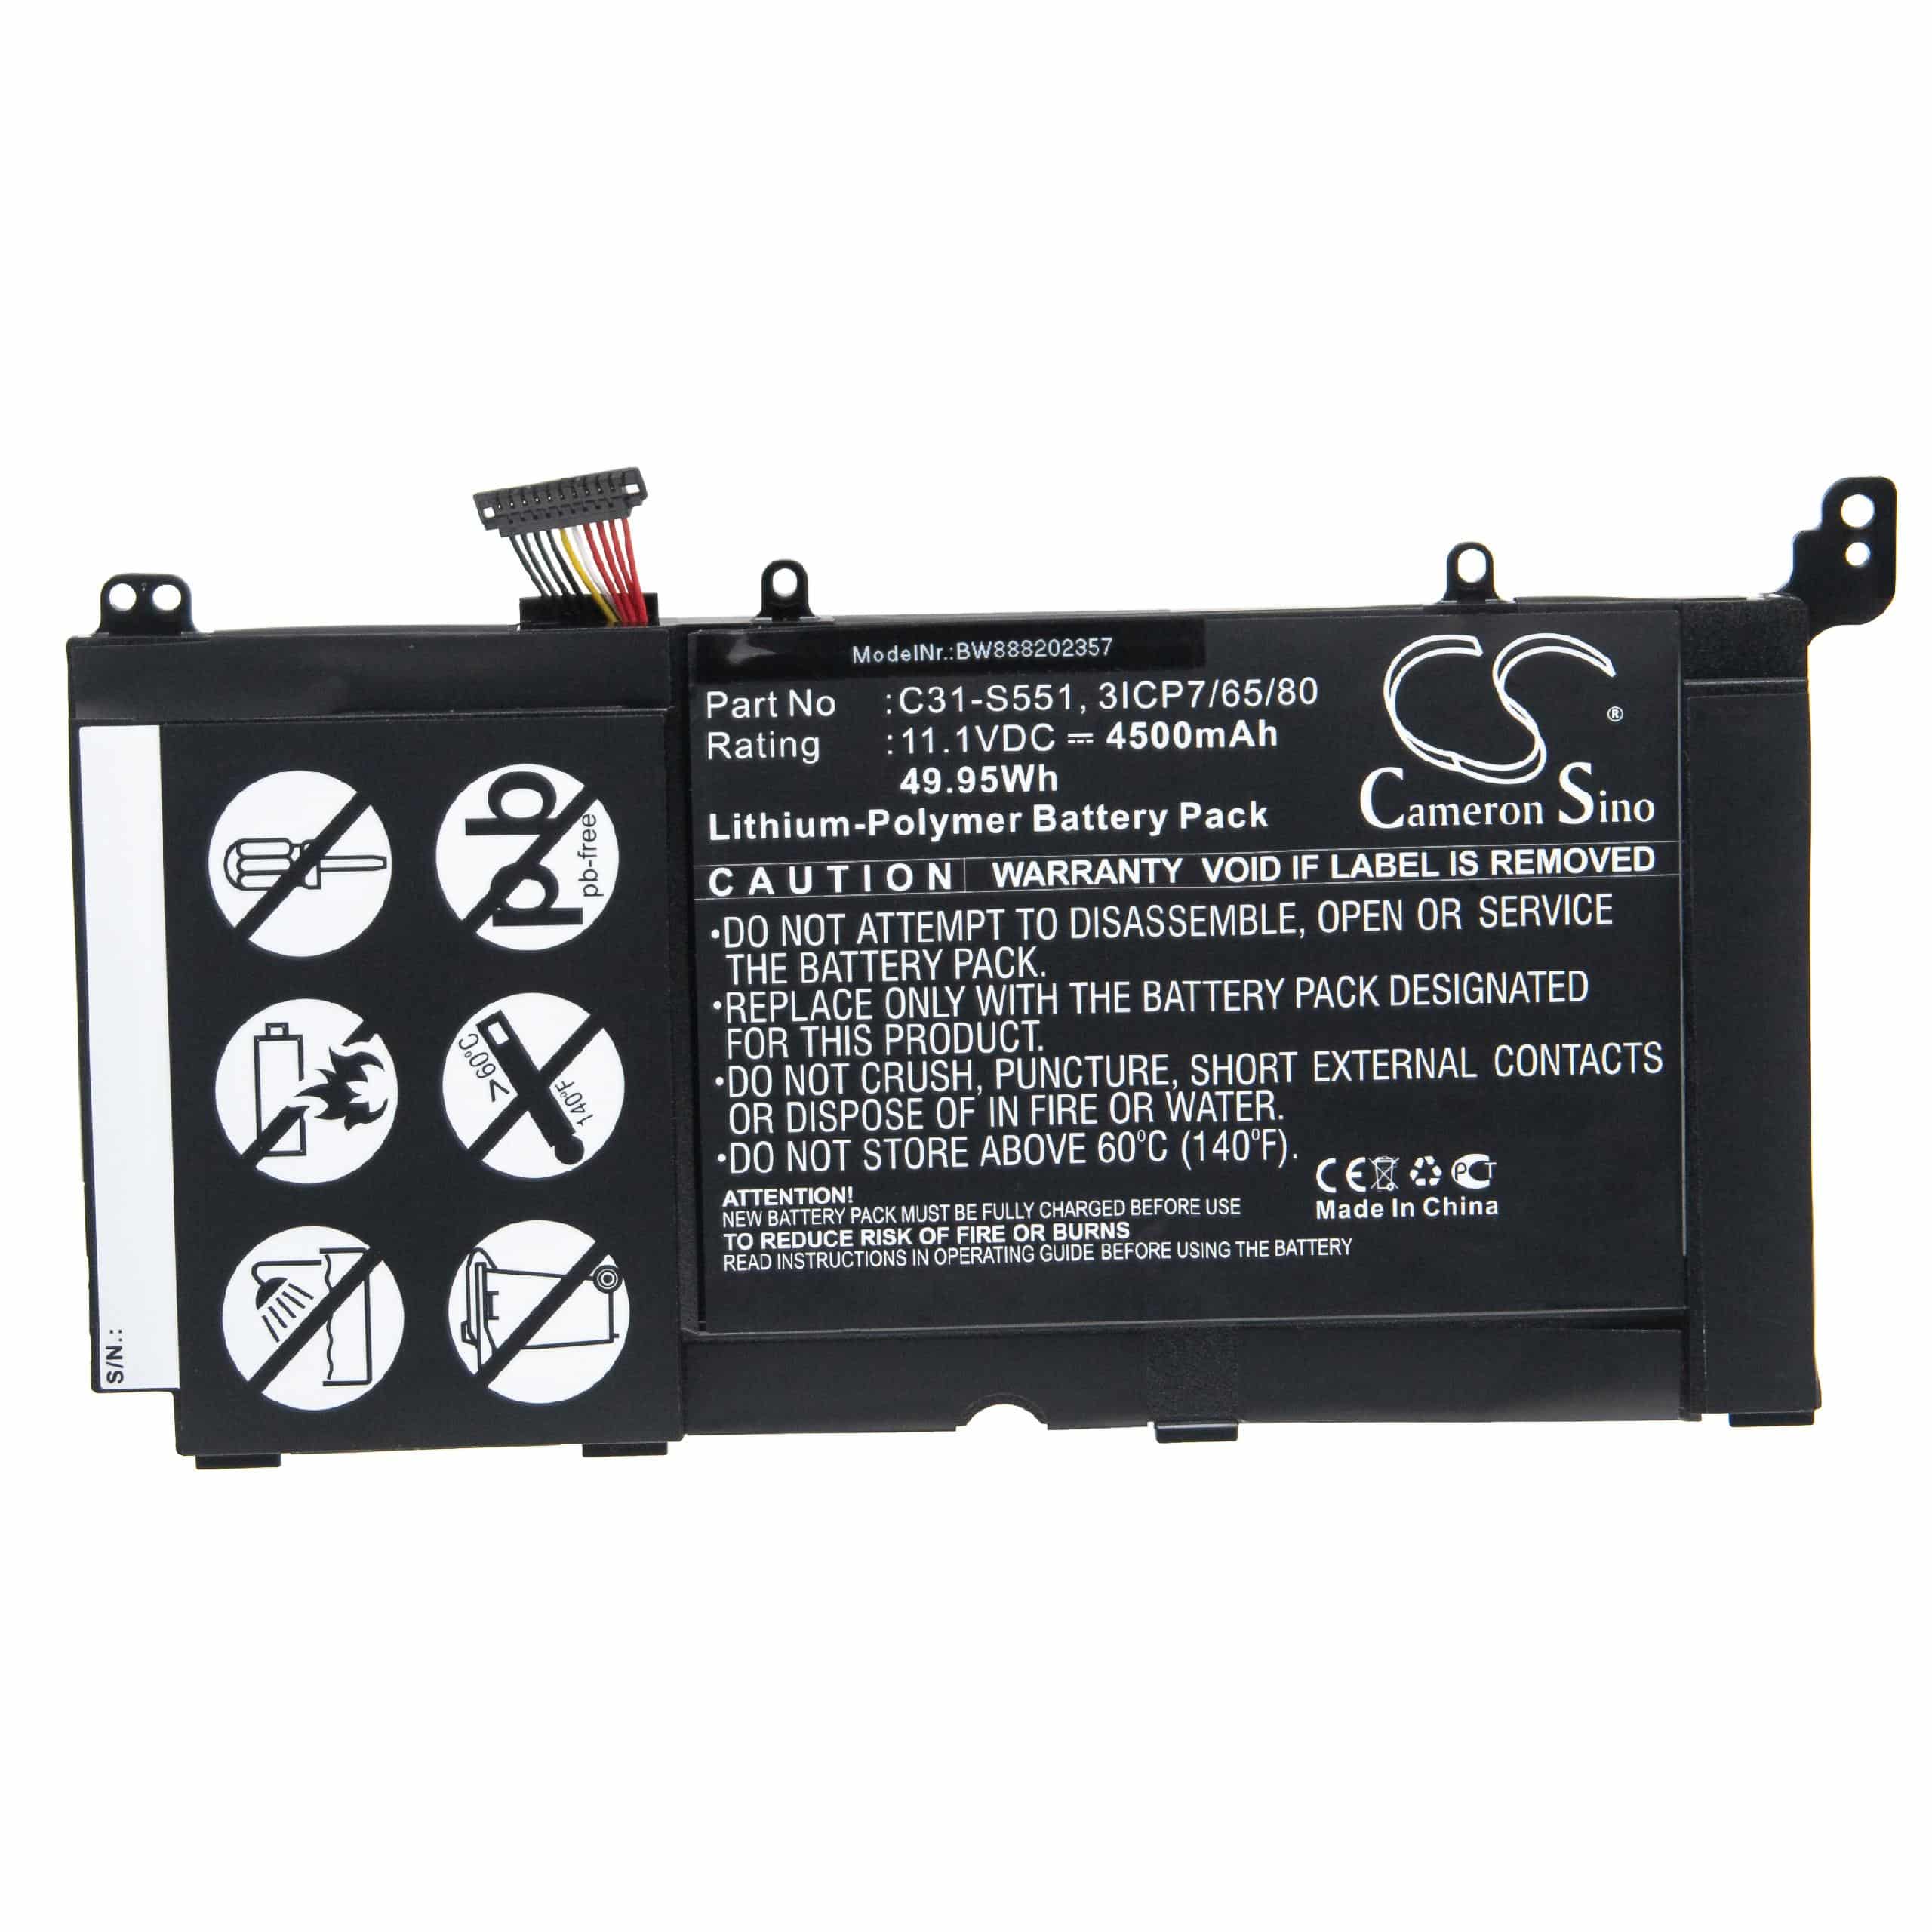 Notebook Battery Replacement for Asus S551LB-CJ046H, C31-S551, 3ICP7/65/80 - 4500mAh 11.1V Li-polymer